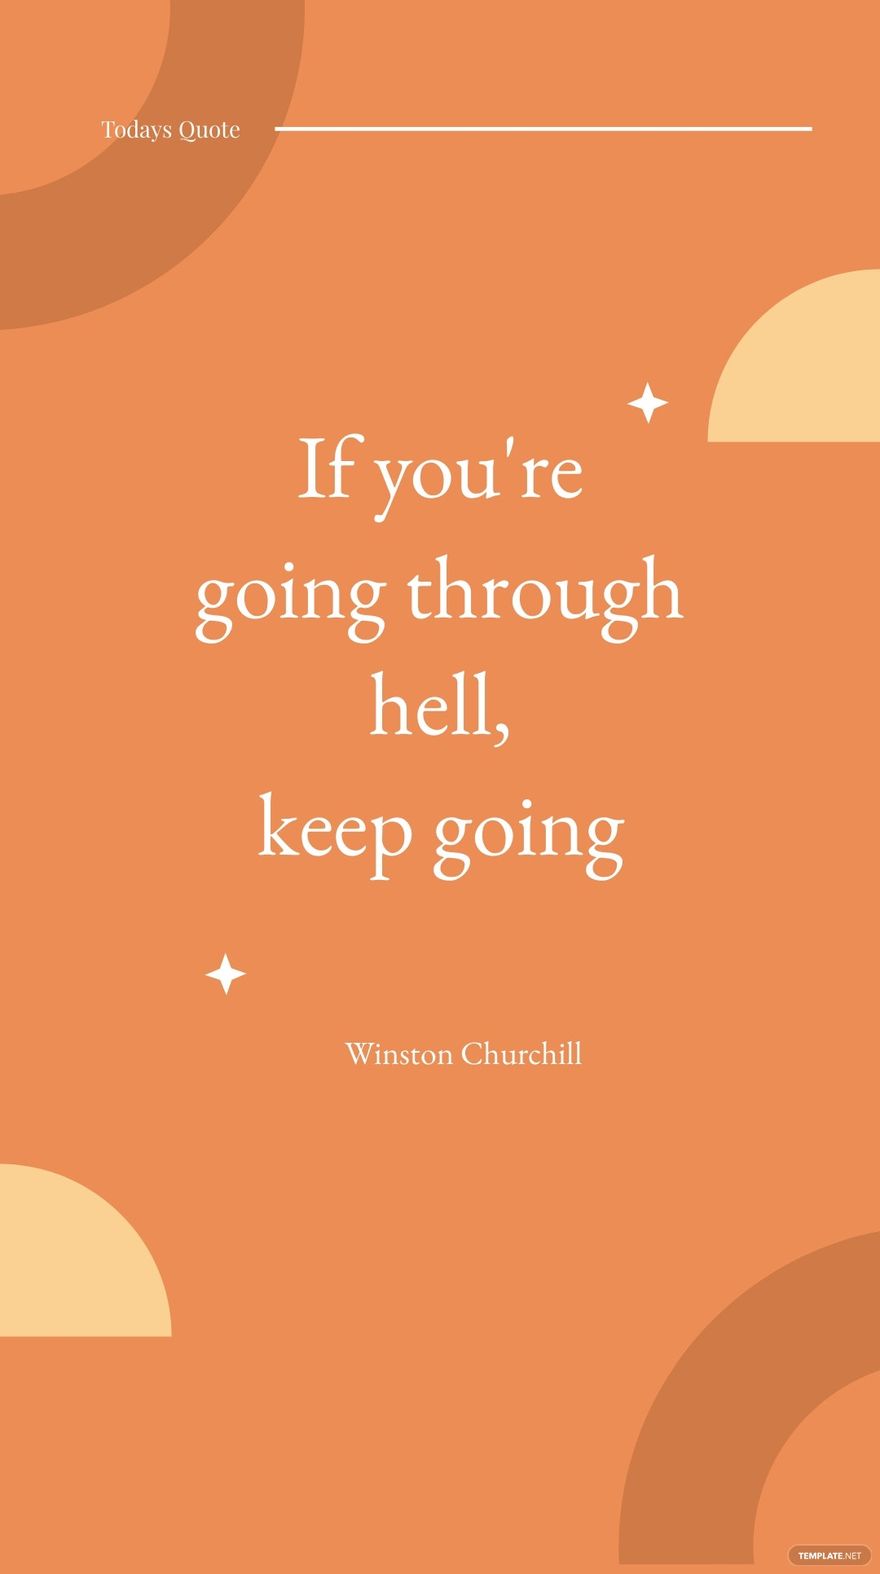 Winston Churchill - If you're going through hell, keep going